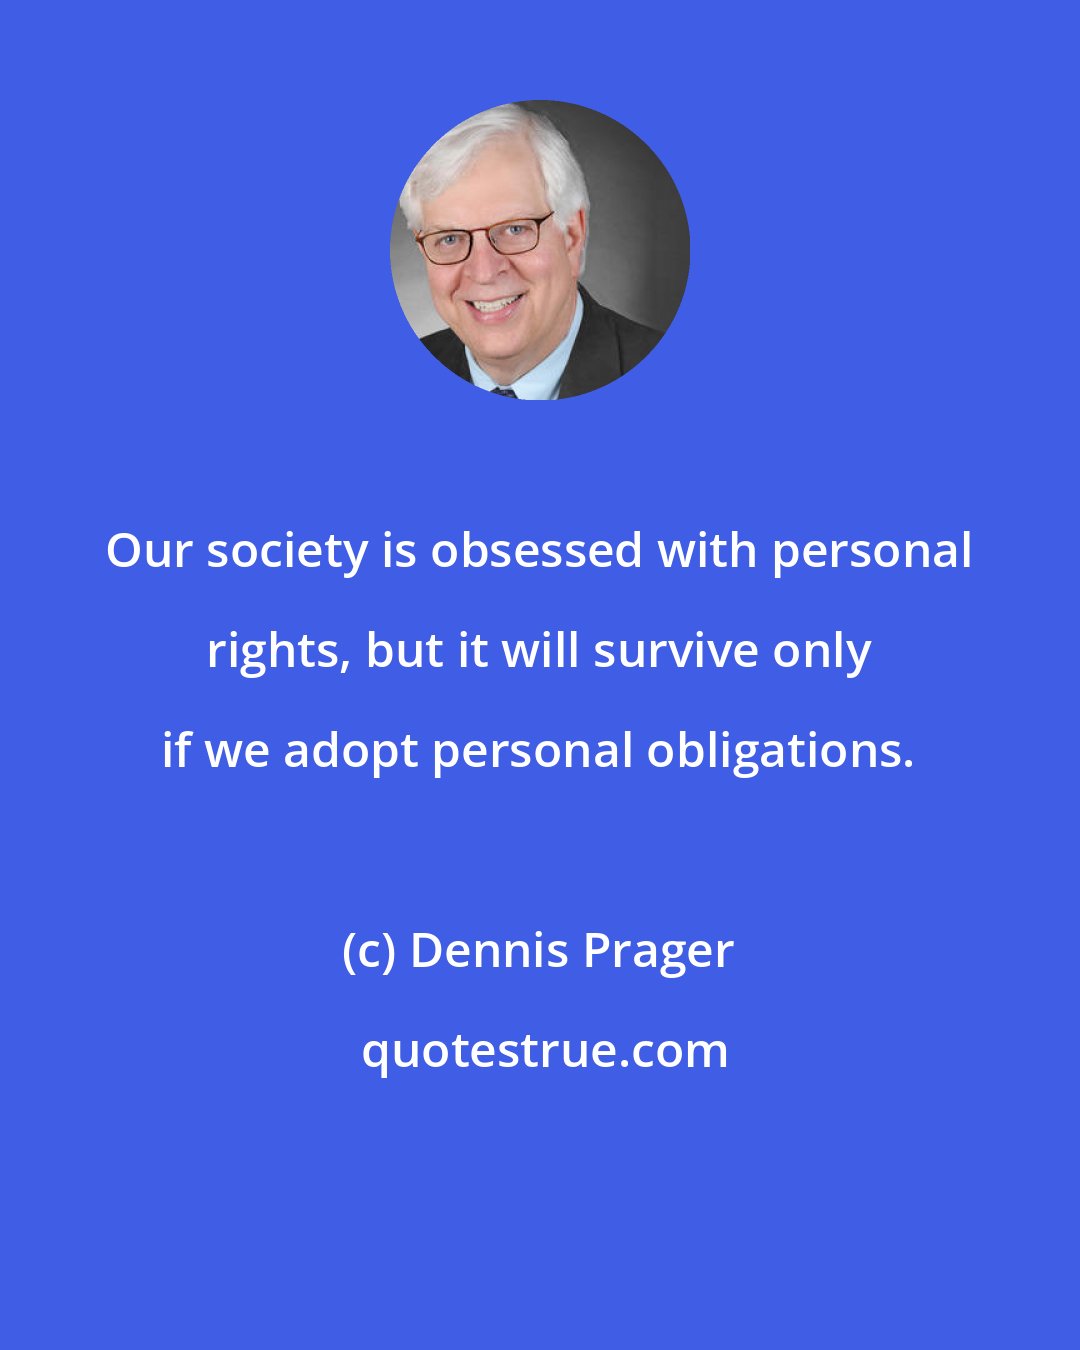 Dennis Prager: Our society is obsessed with personal rights, but it will survive only if we adopt personal obligations.